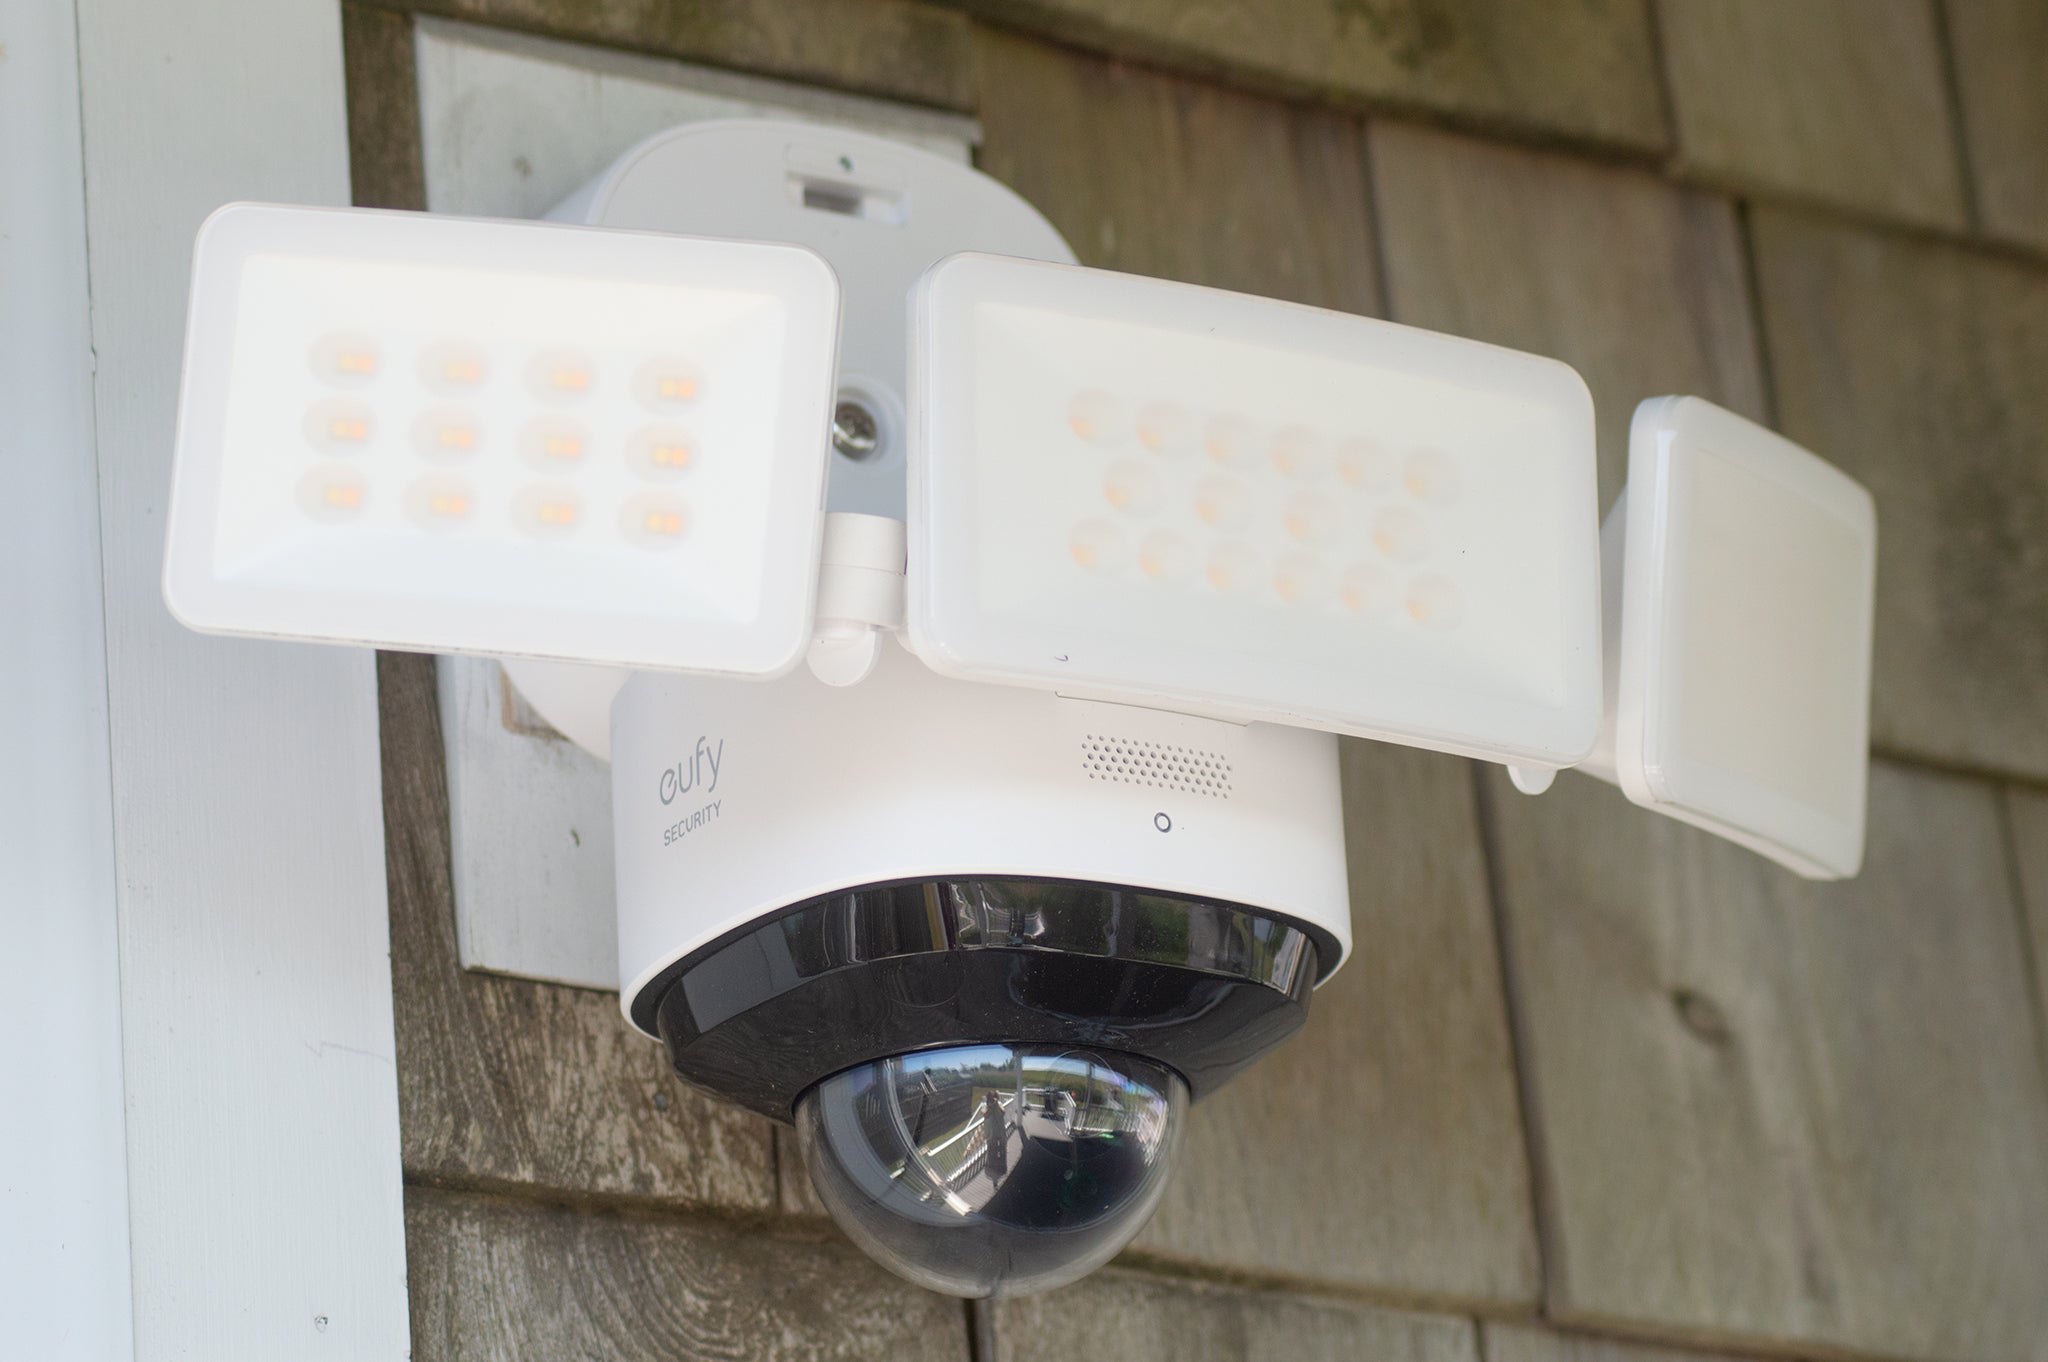 What Is The Best Video Resolution For A Home Surveillance System